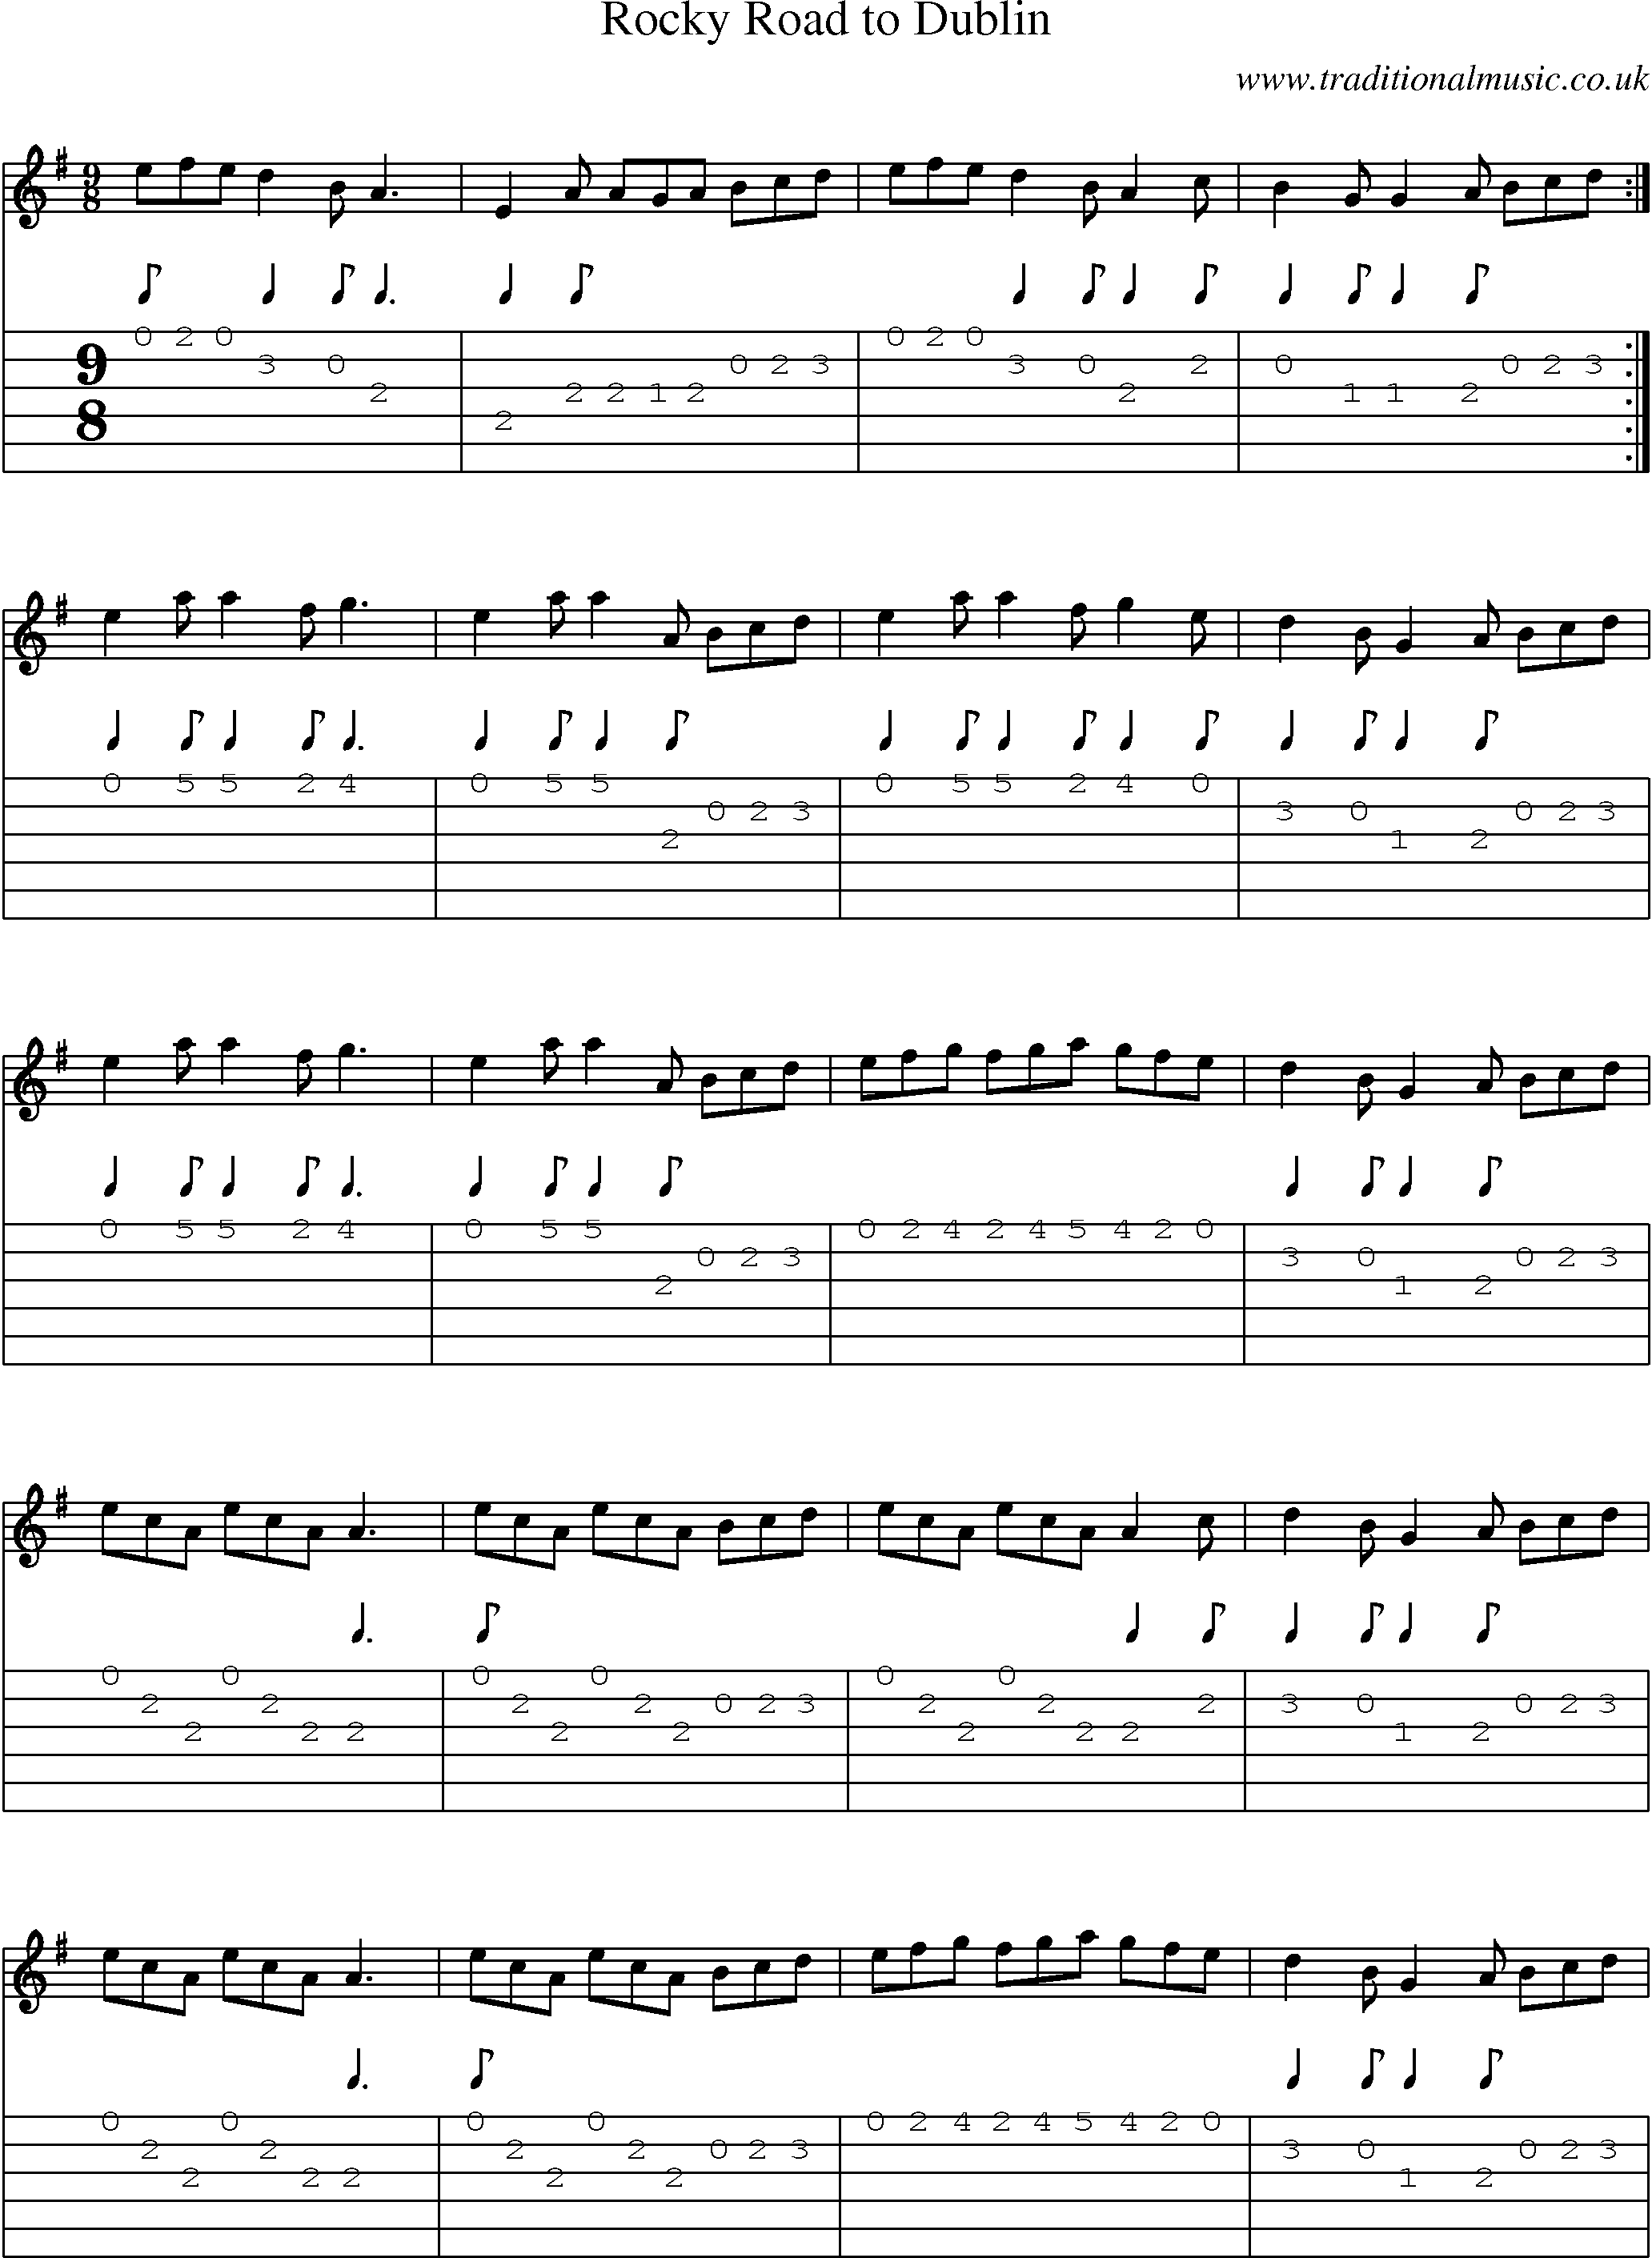 Music Score and Guitar Tabs for Rocky Road To Dublin